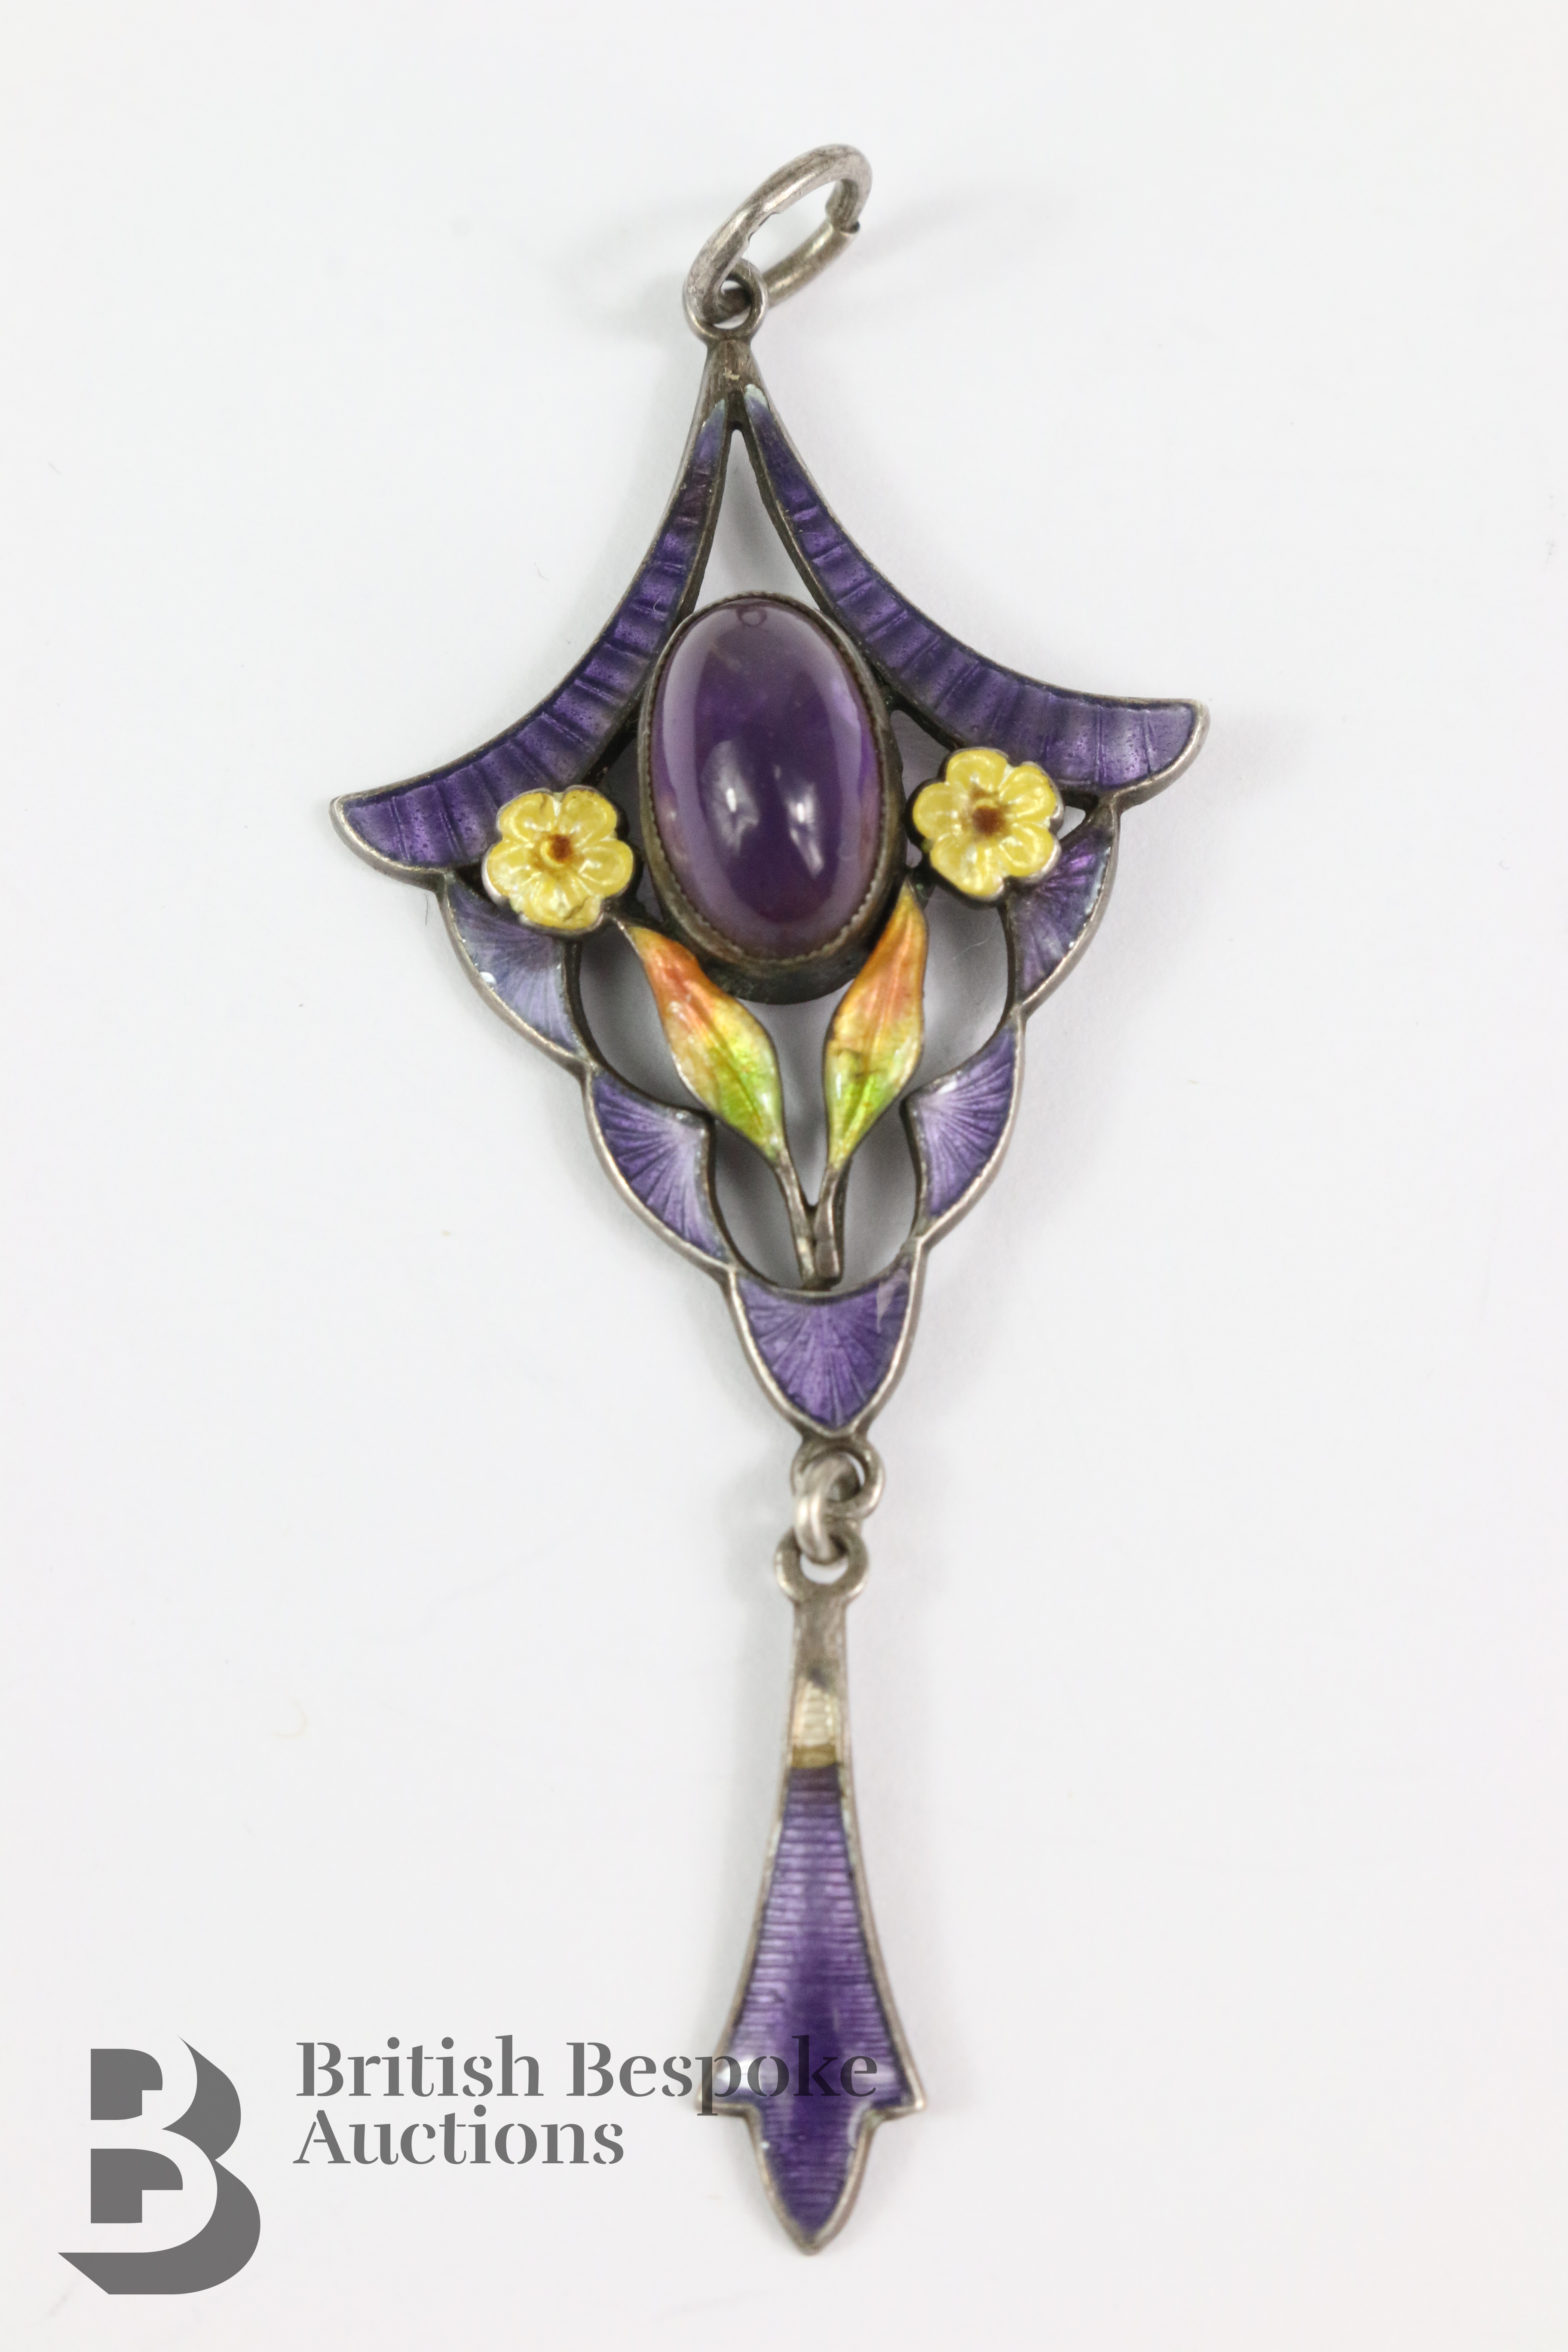 Primrose Society Brooch and Arts & Crafts Necklace - Image 13 of 18